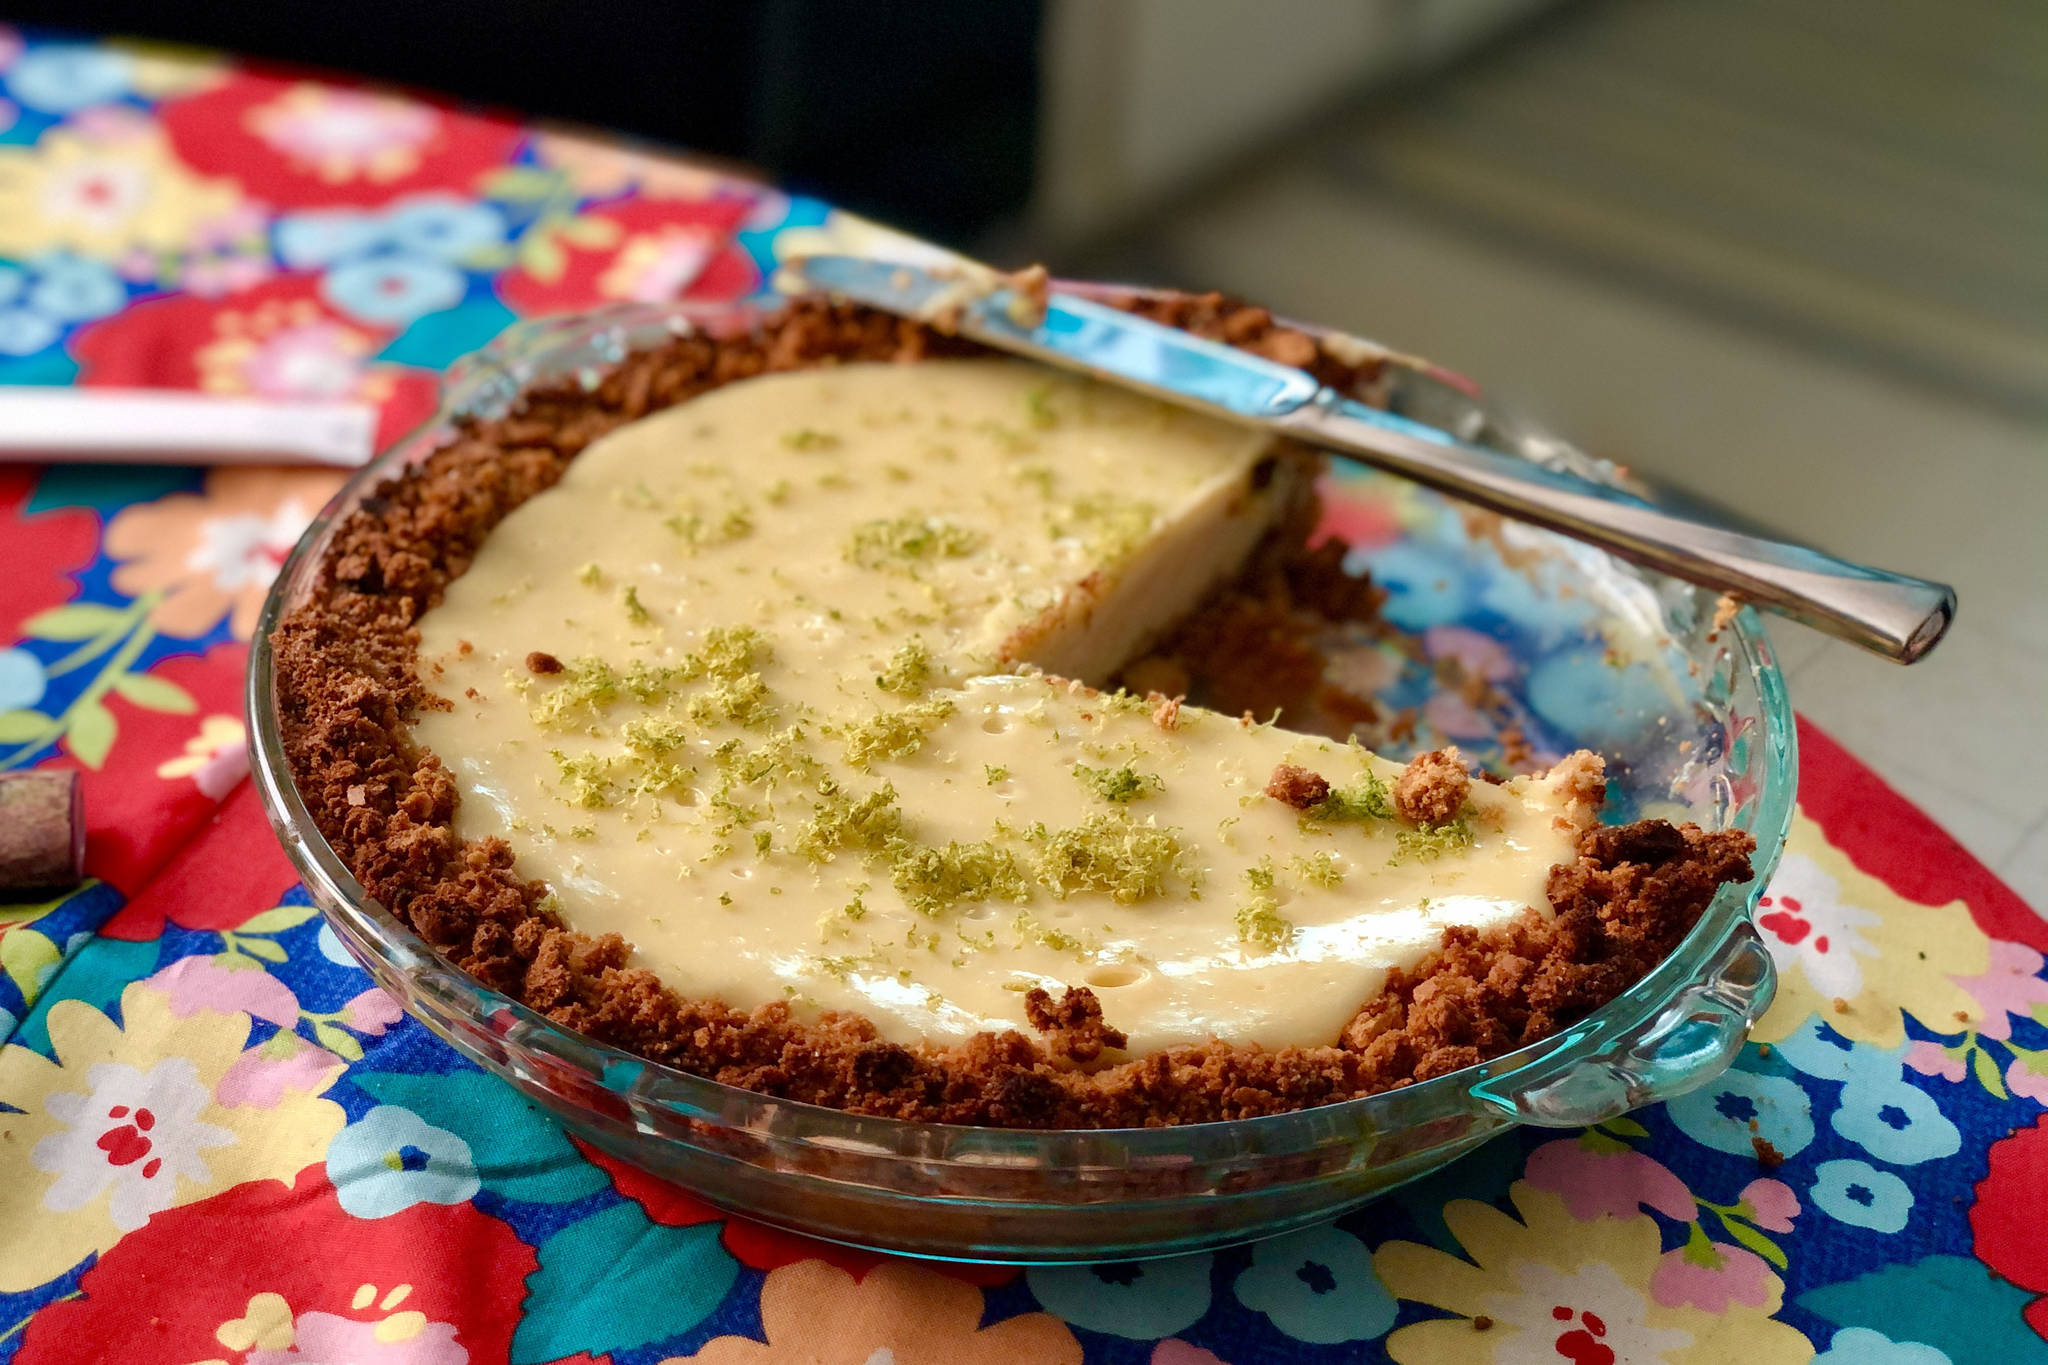 Photo by Victoria Petersen/Peninsula Clarion 
Key lime pie, inspired by a recipe from Kim Sunée, makes a refreshing winter dessert, on Wednesday, Jan. 20, in Anchorage.